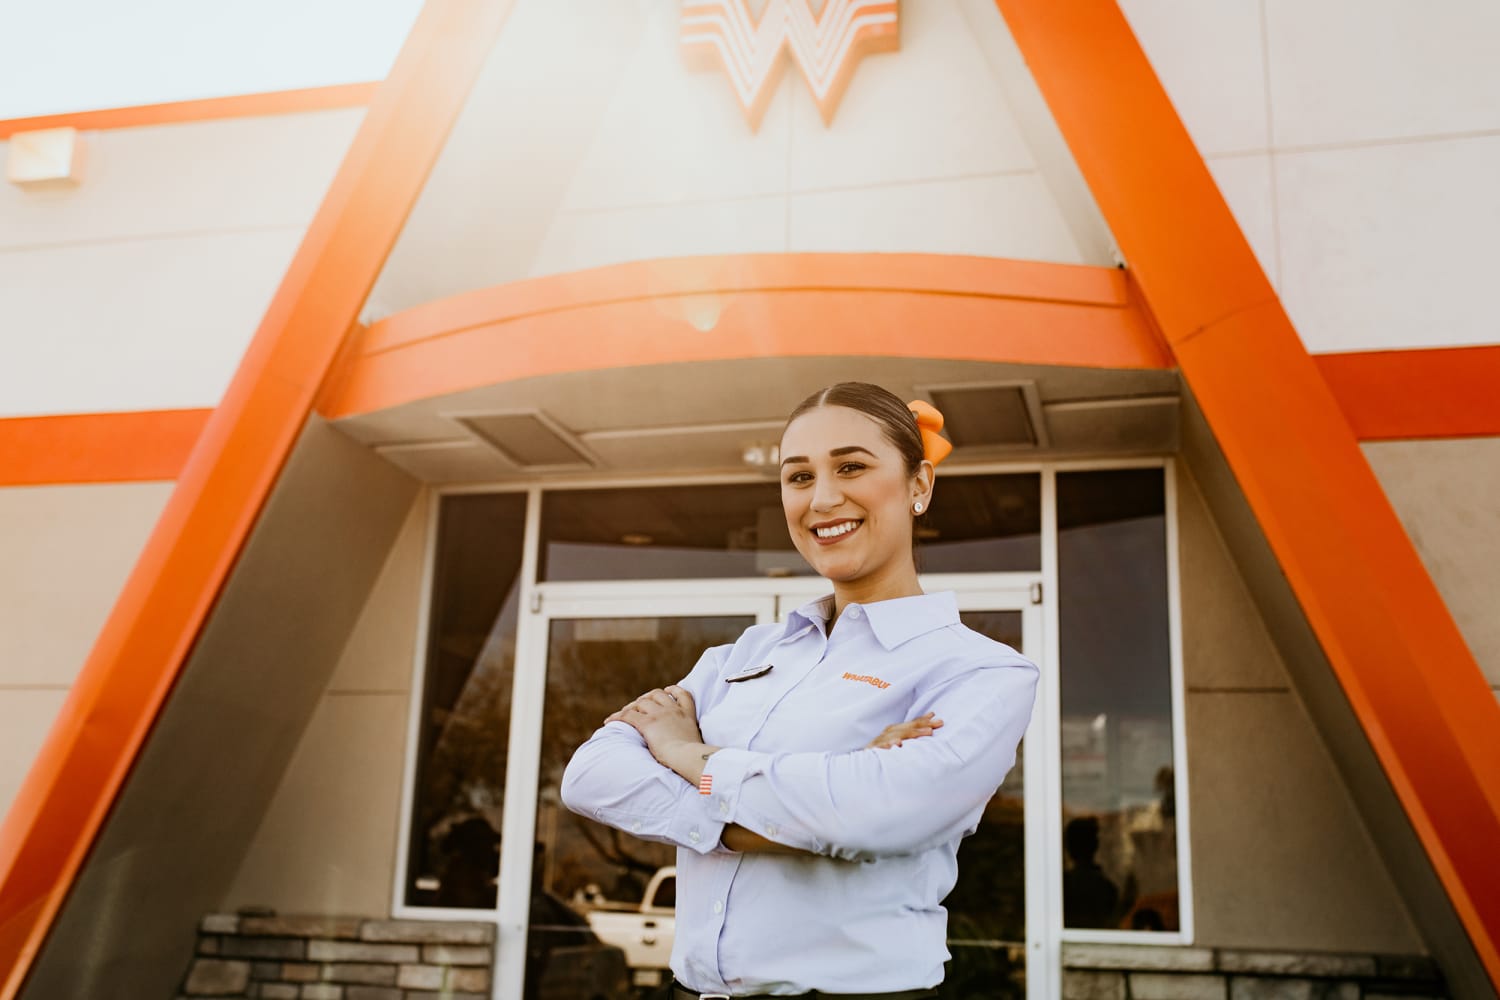 Whataburger Worker Says Boss Offered To Drive Her To Work